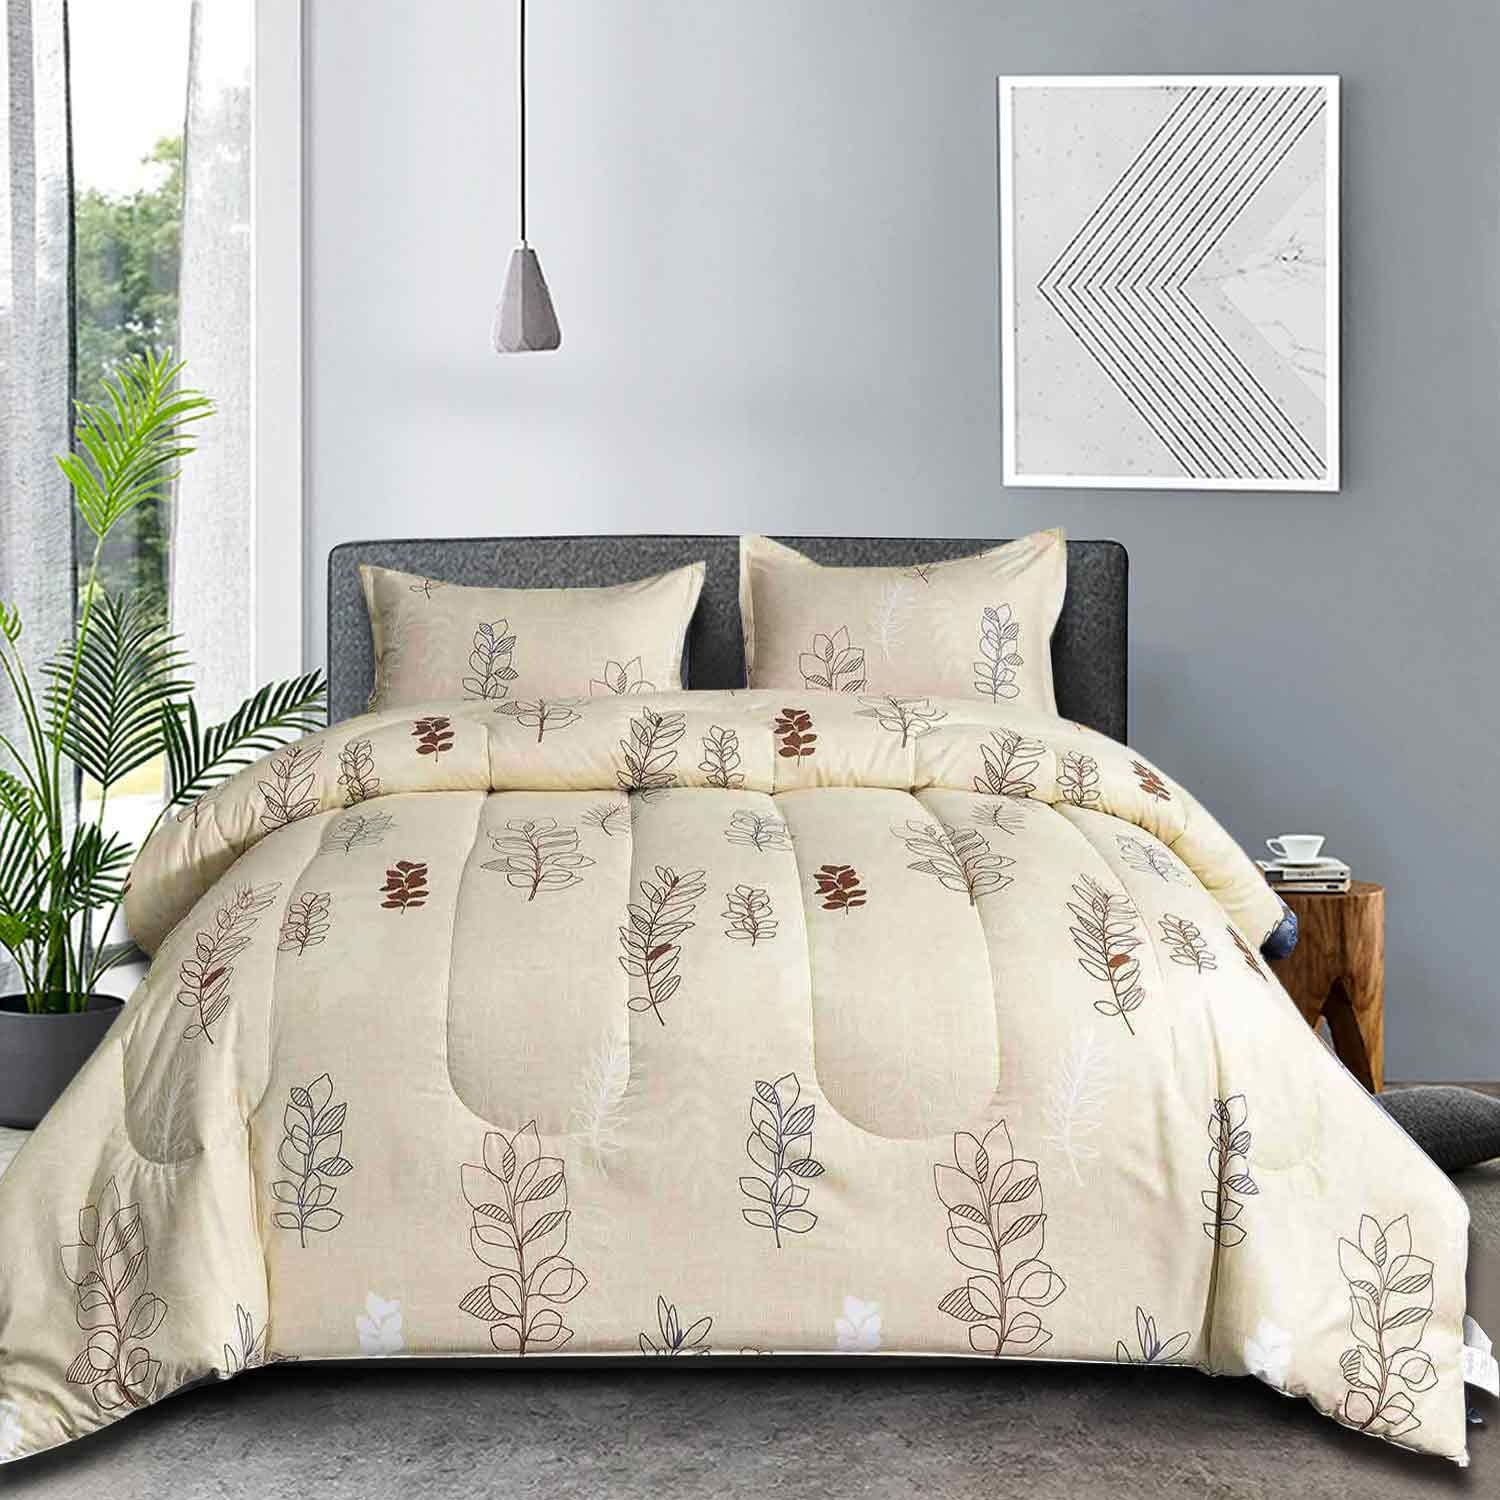 NANKO King Duvet Cover Set Grey Floral & White Flower Leaf Print Pattern Double Sided 3pc 104x90 Microfiber Comforter Quilt Bedding Cover with Zip Ties Modern Farmhouse for Men and Women Teen Gray 